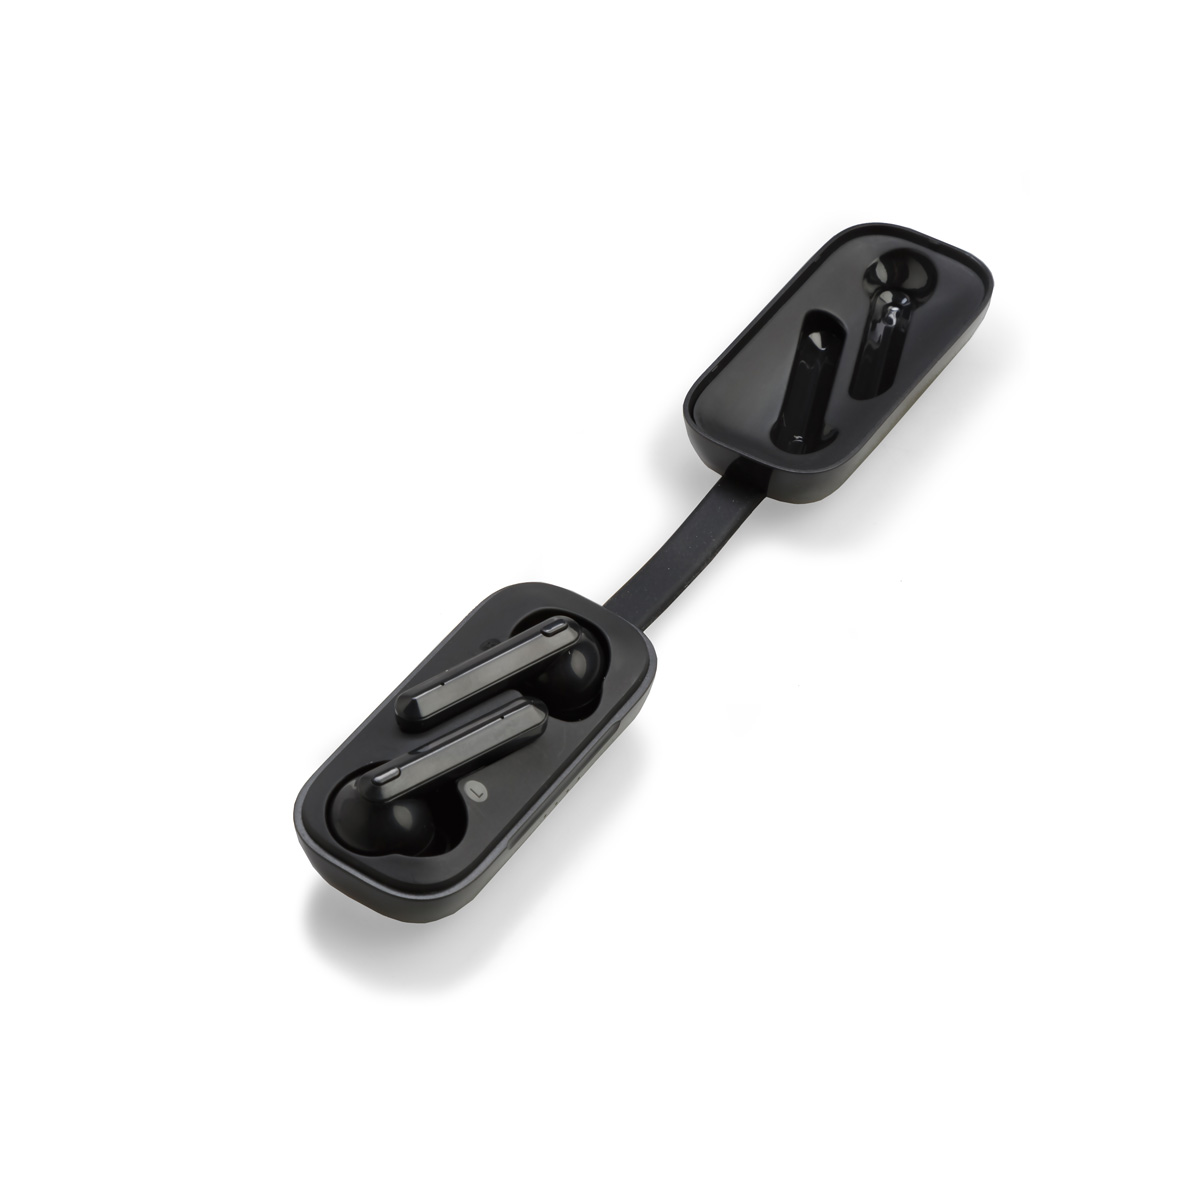 Baksen Bluetooth Wireless Earbuds Product Image